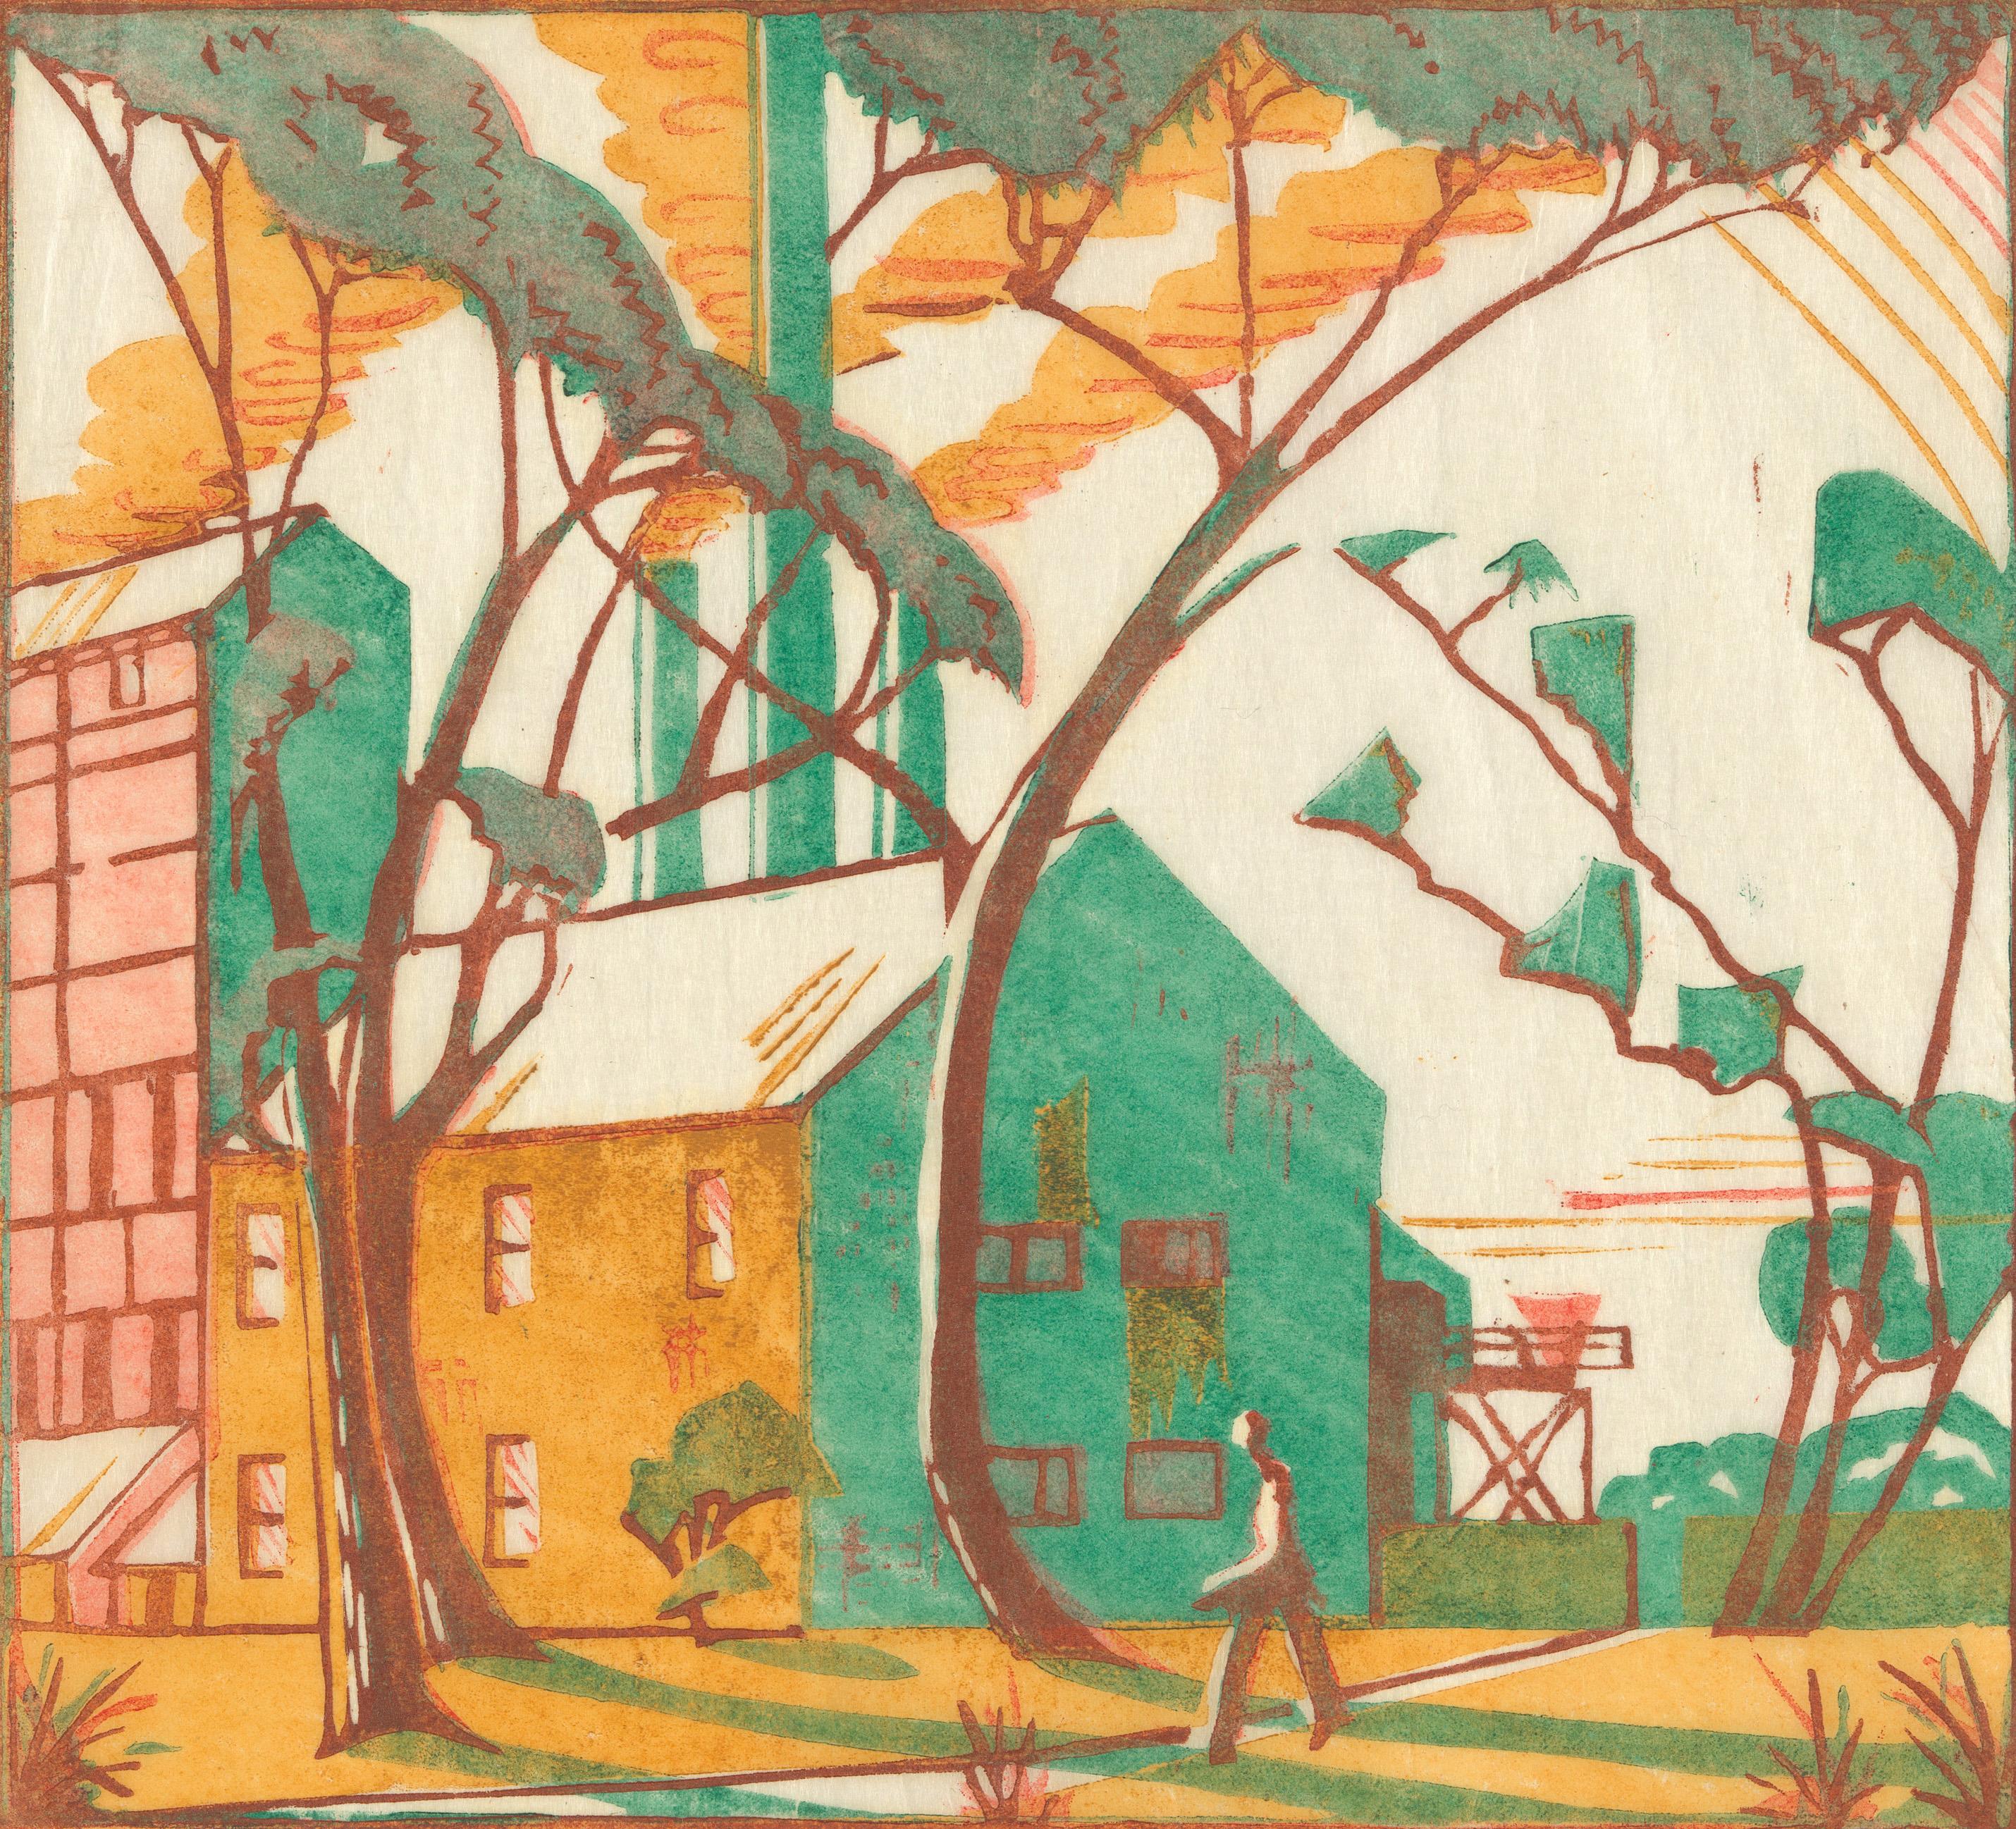 Eveline Syme, <em>The factory</em>, 1933, colour linocut, printed in colour inks, from four blocks. National Gallery of Australia, Kamberri/Canberra. Purchased 1979.<br />
© Estate of Eveline Syme